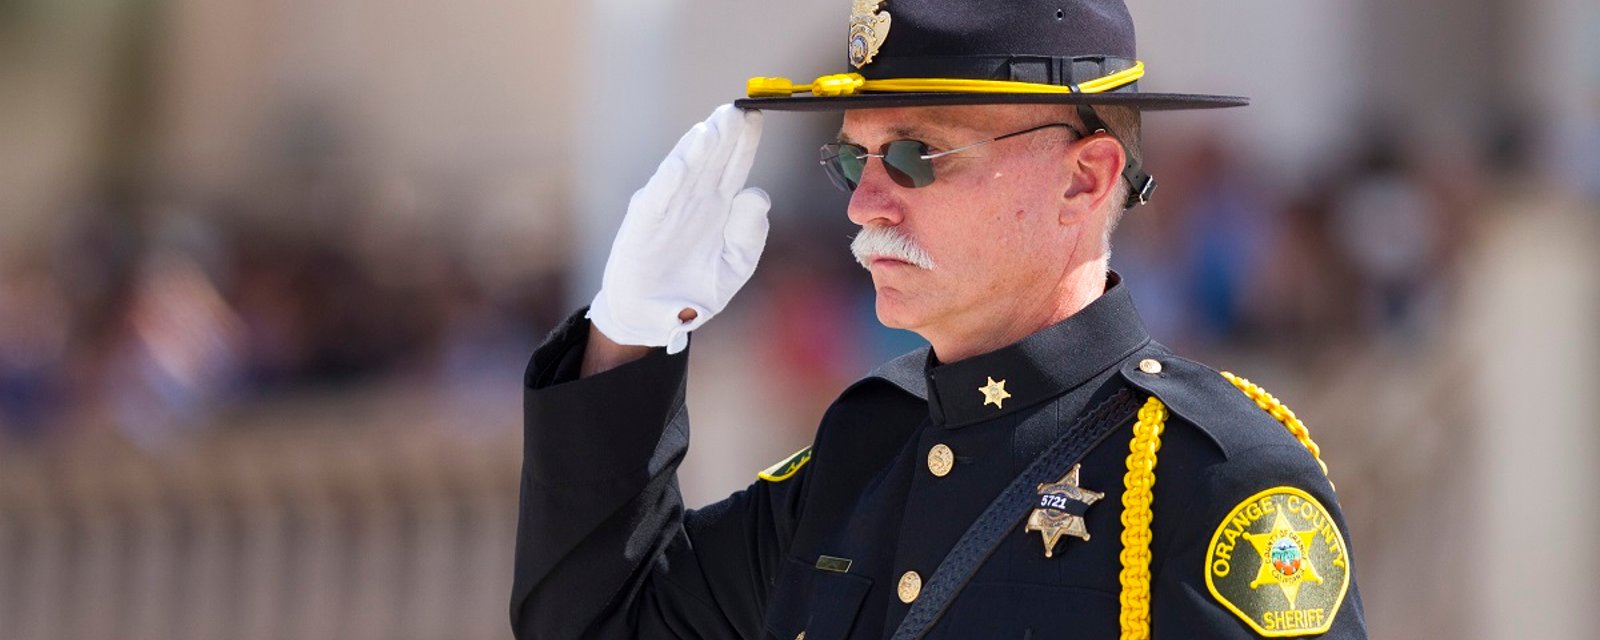 NHL team to honor fallen officers even after the NFL refused to.